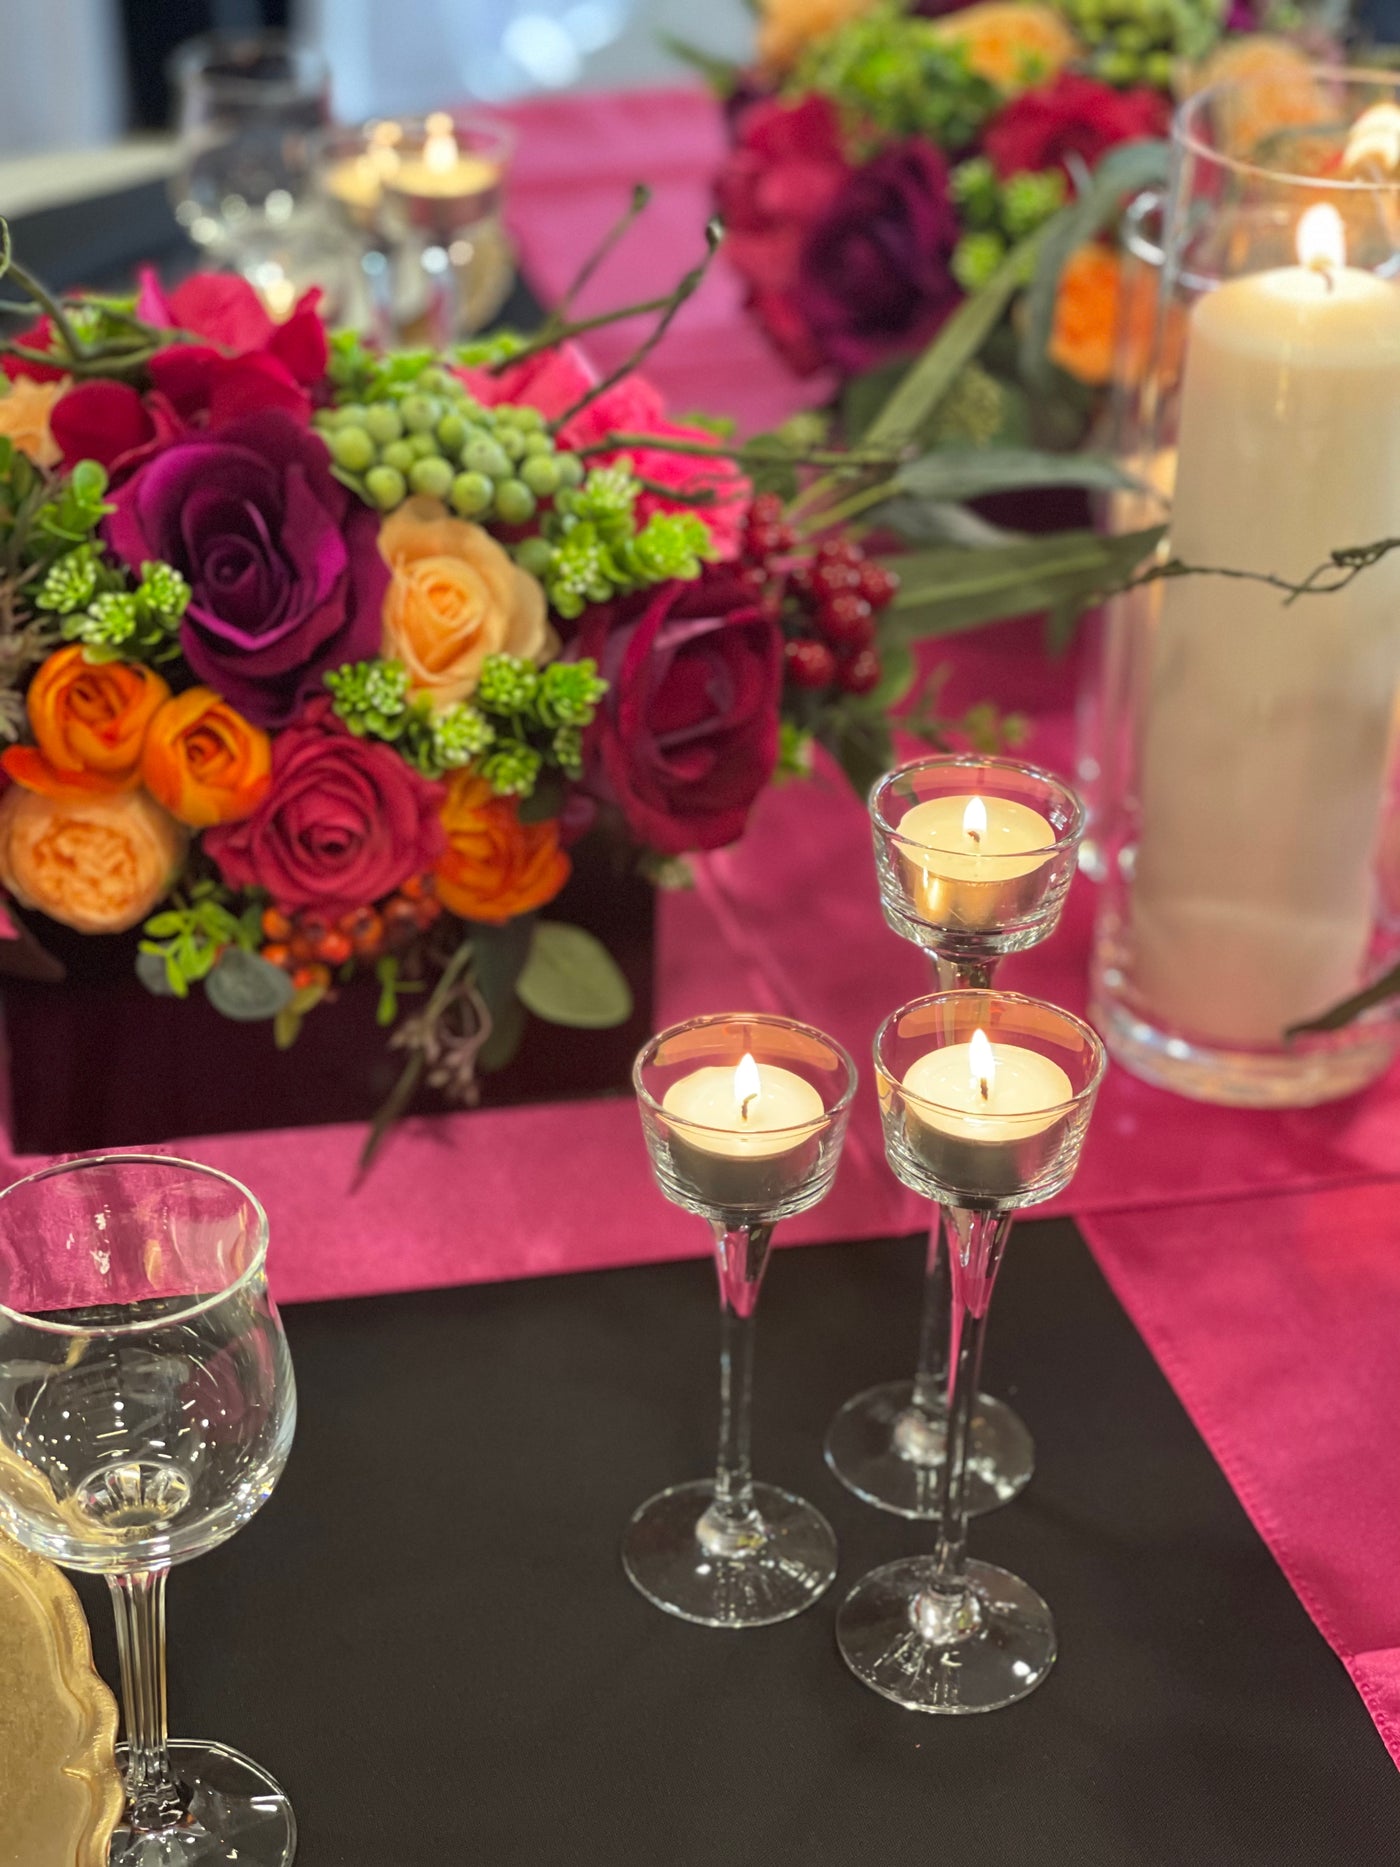 Rent a Rose- table setting- table runner- fuchsia